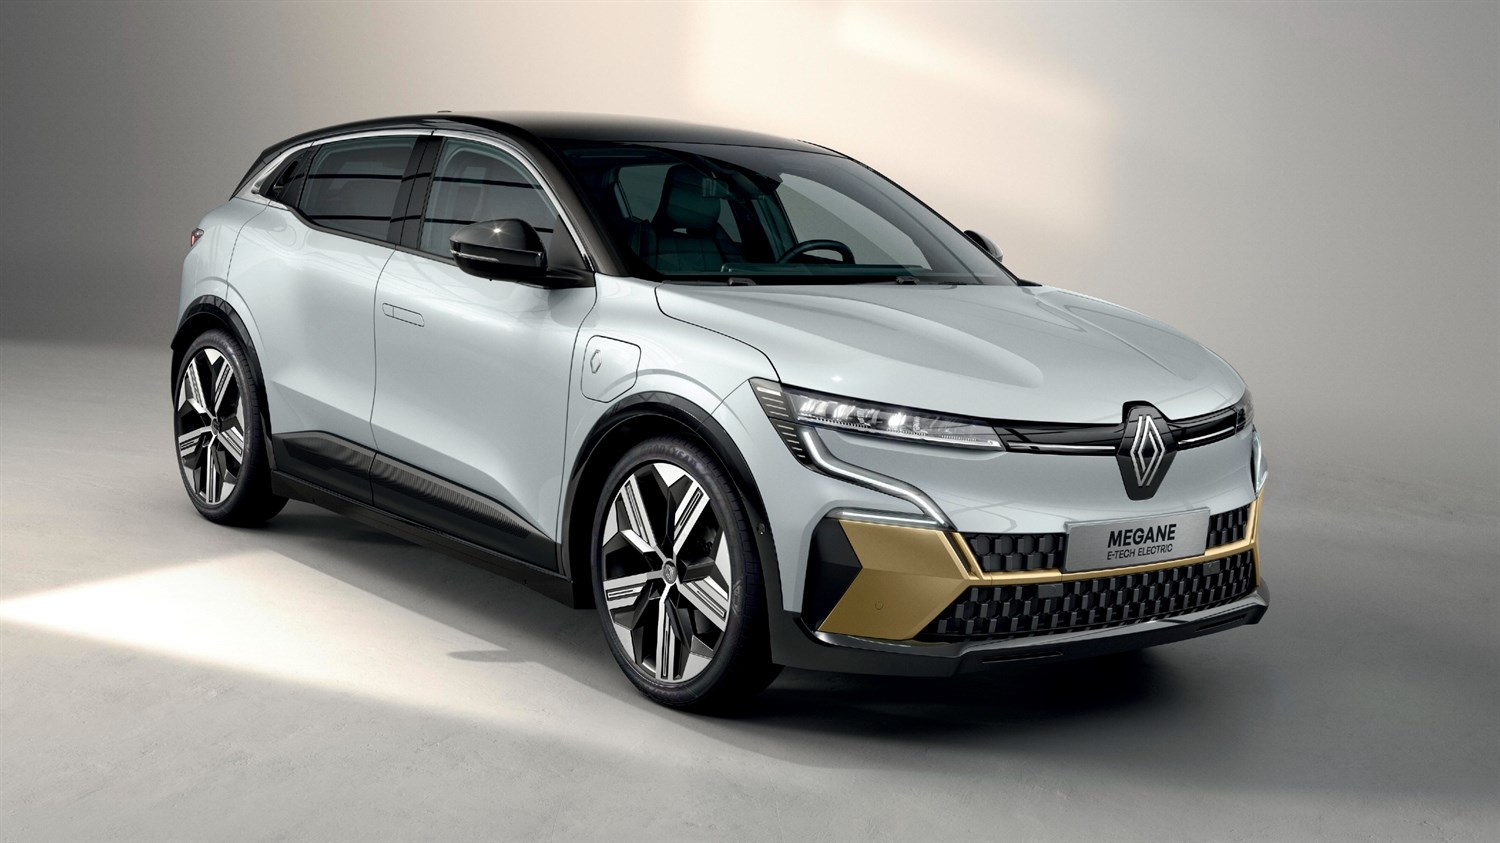 All-New Renault Megane E-Tech Electric unveiled at the IAA Munich Mobility Show 2021